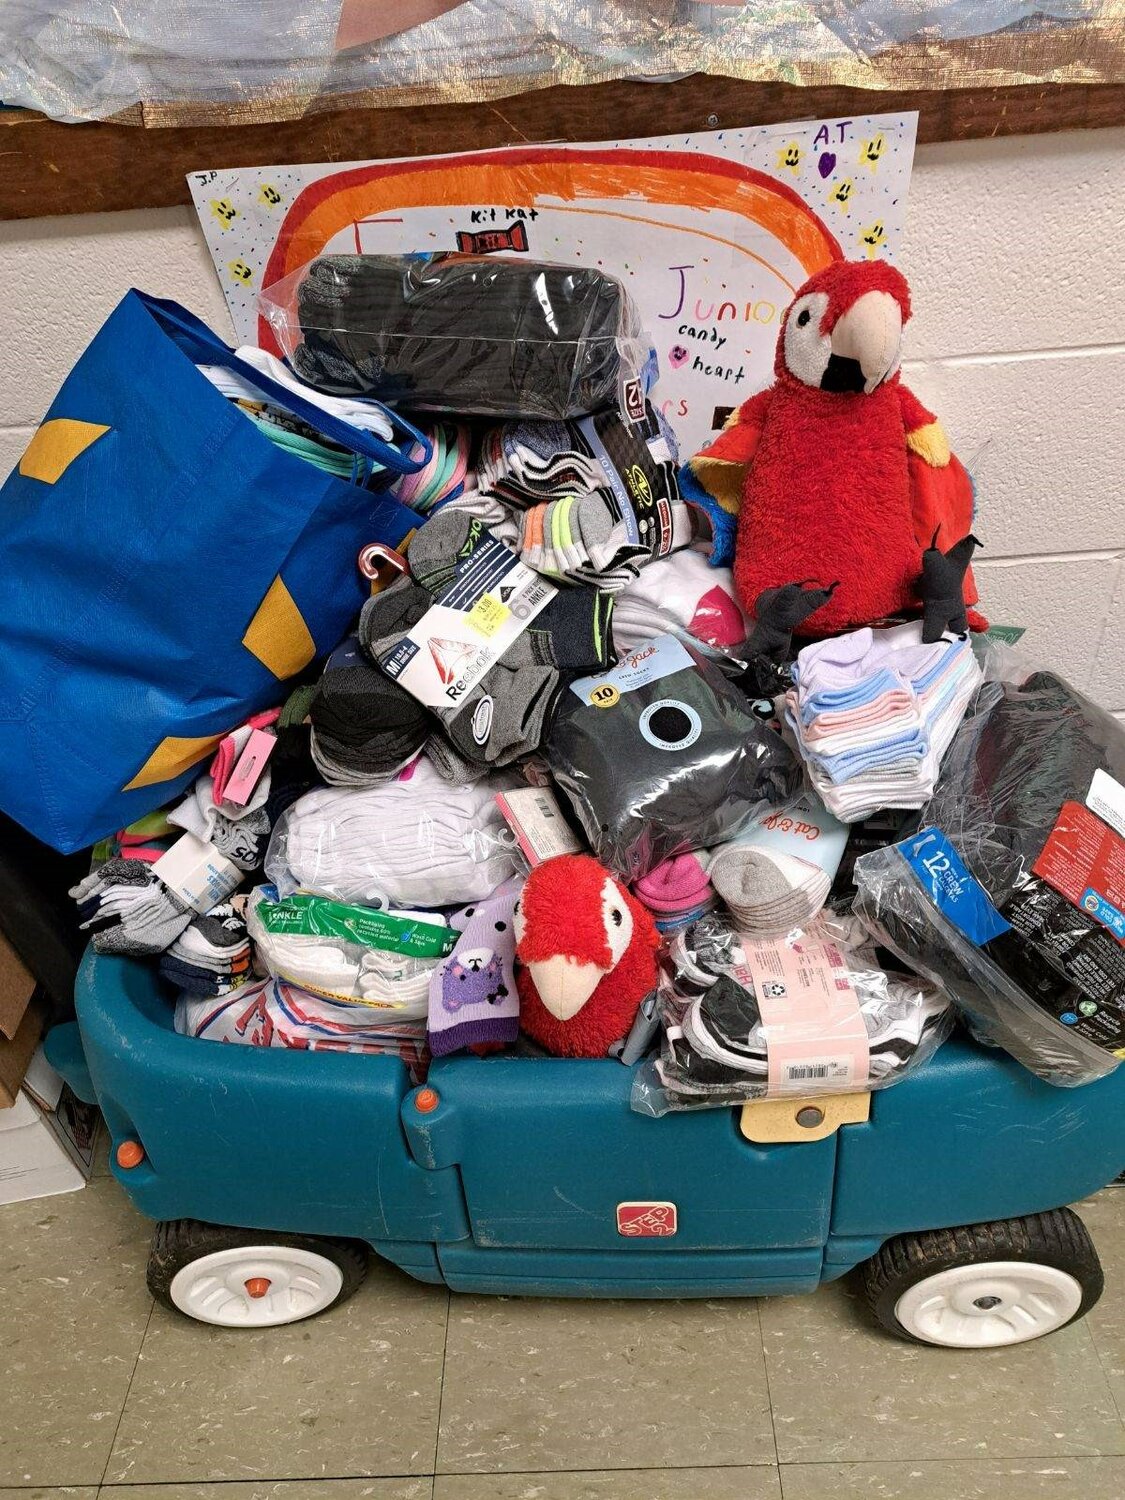 Orlo Avenue School Feinstein Junior Scholars held a SOCKtober drive and collected 1,434 pairs of socks. Thank you to the community for helping us surpass our goal.  The socks were donated back to the community through Hope and Faith.